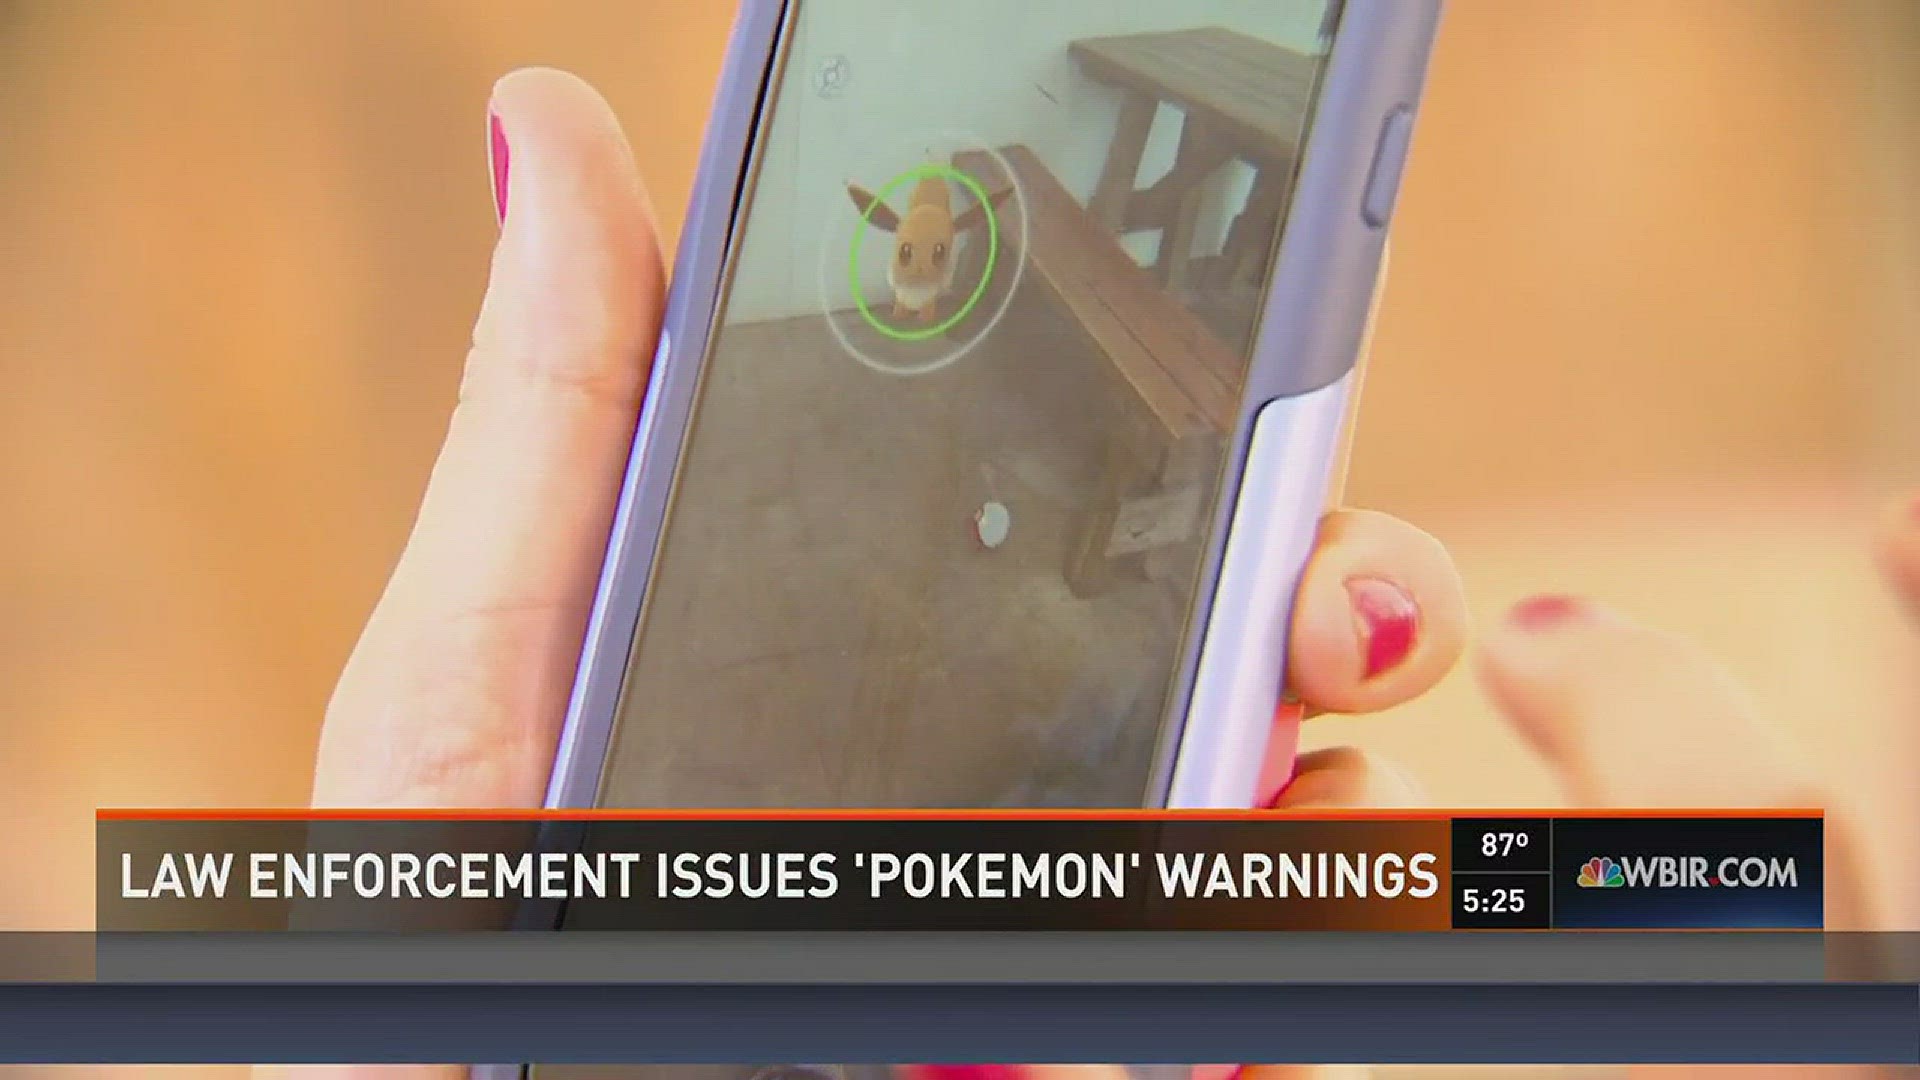 Knoxville and Tennessee officials are warning 'Pokemon Go' users to play safely and follow local laws.